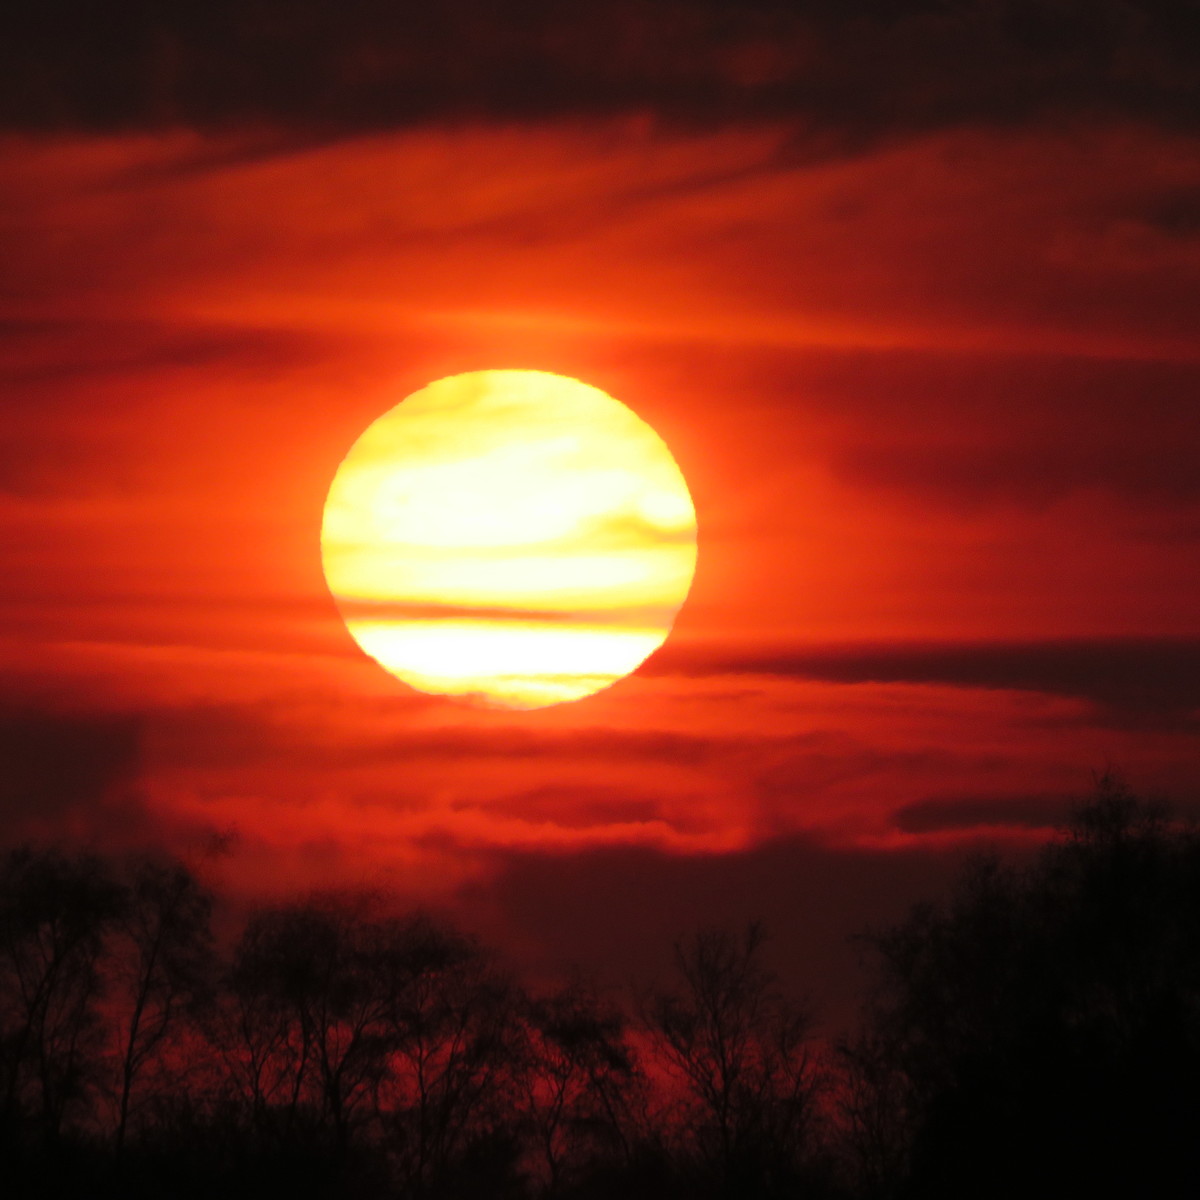 Sunset of 6th April 2019 from Irlam, UK